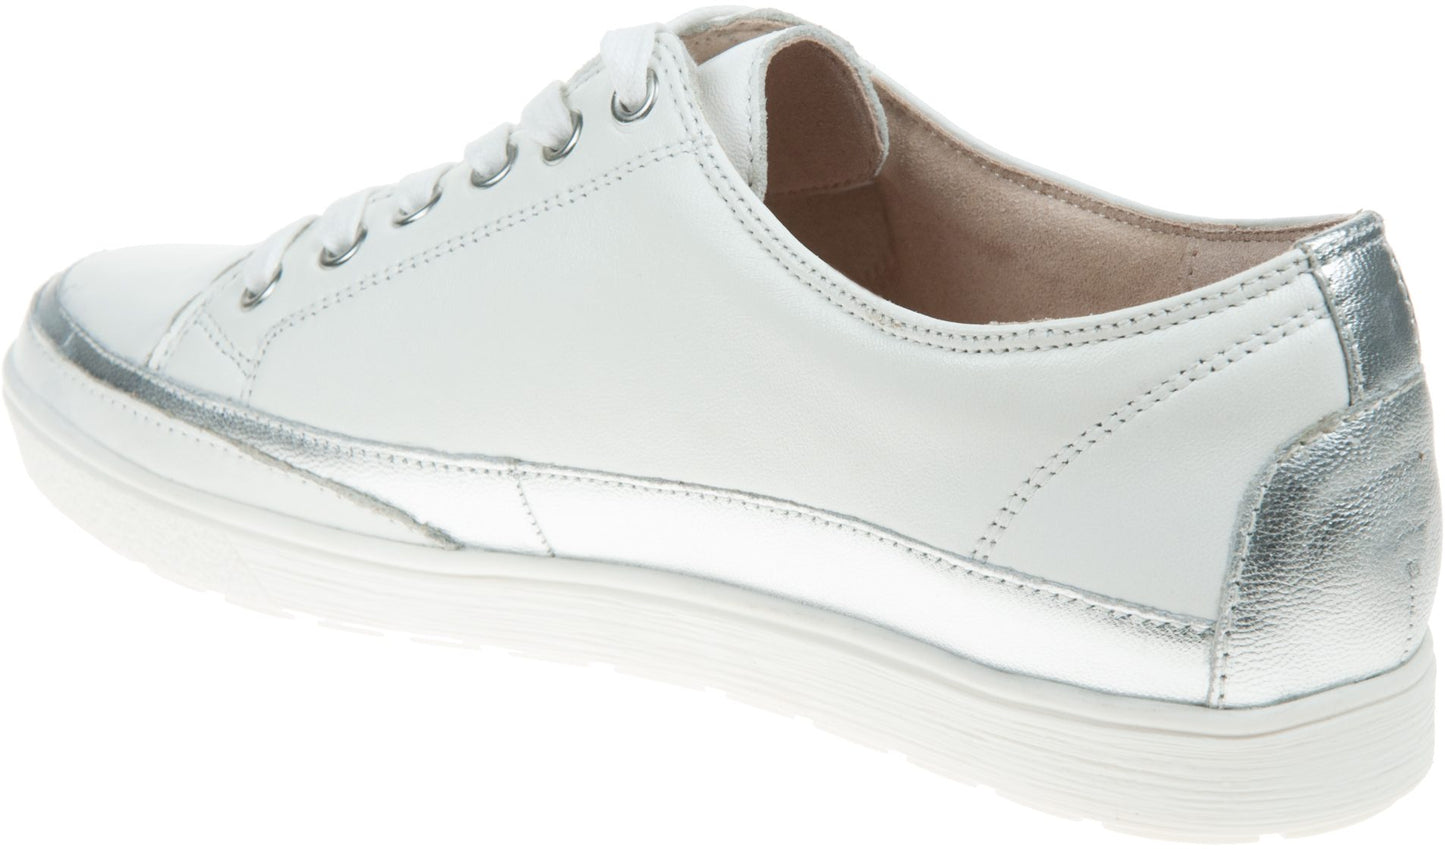 Caprice white nappa leather lace up Trainer Only size 4 left